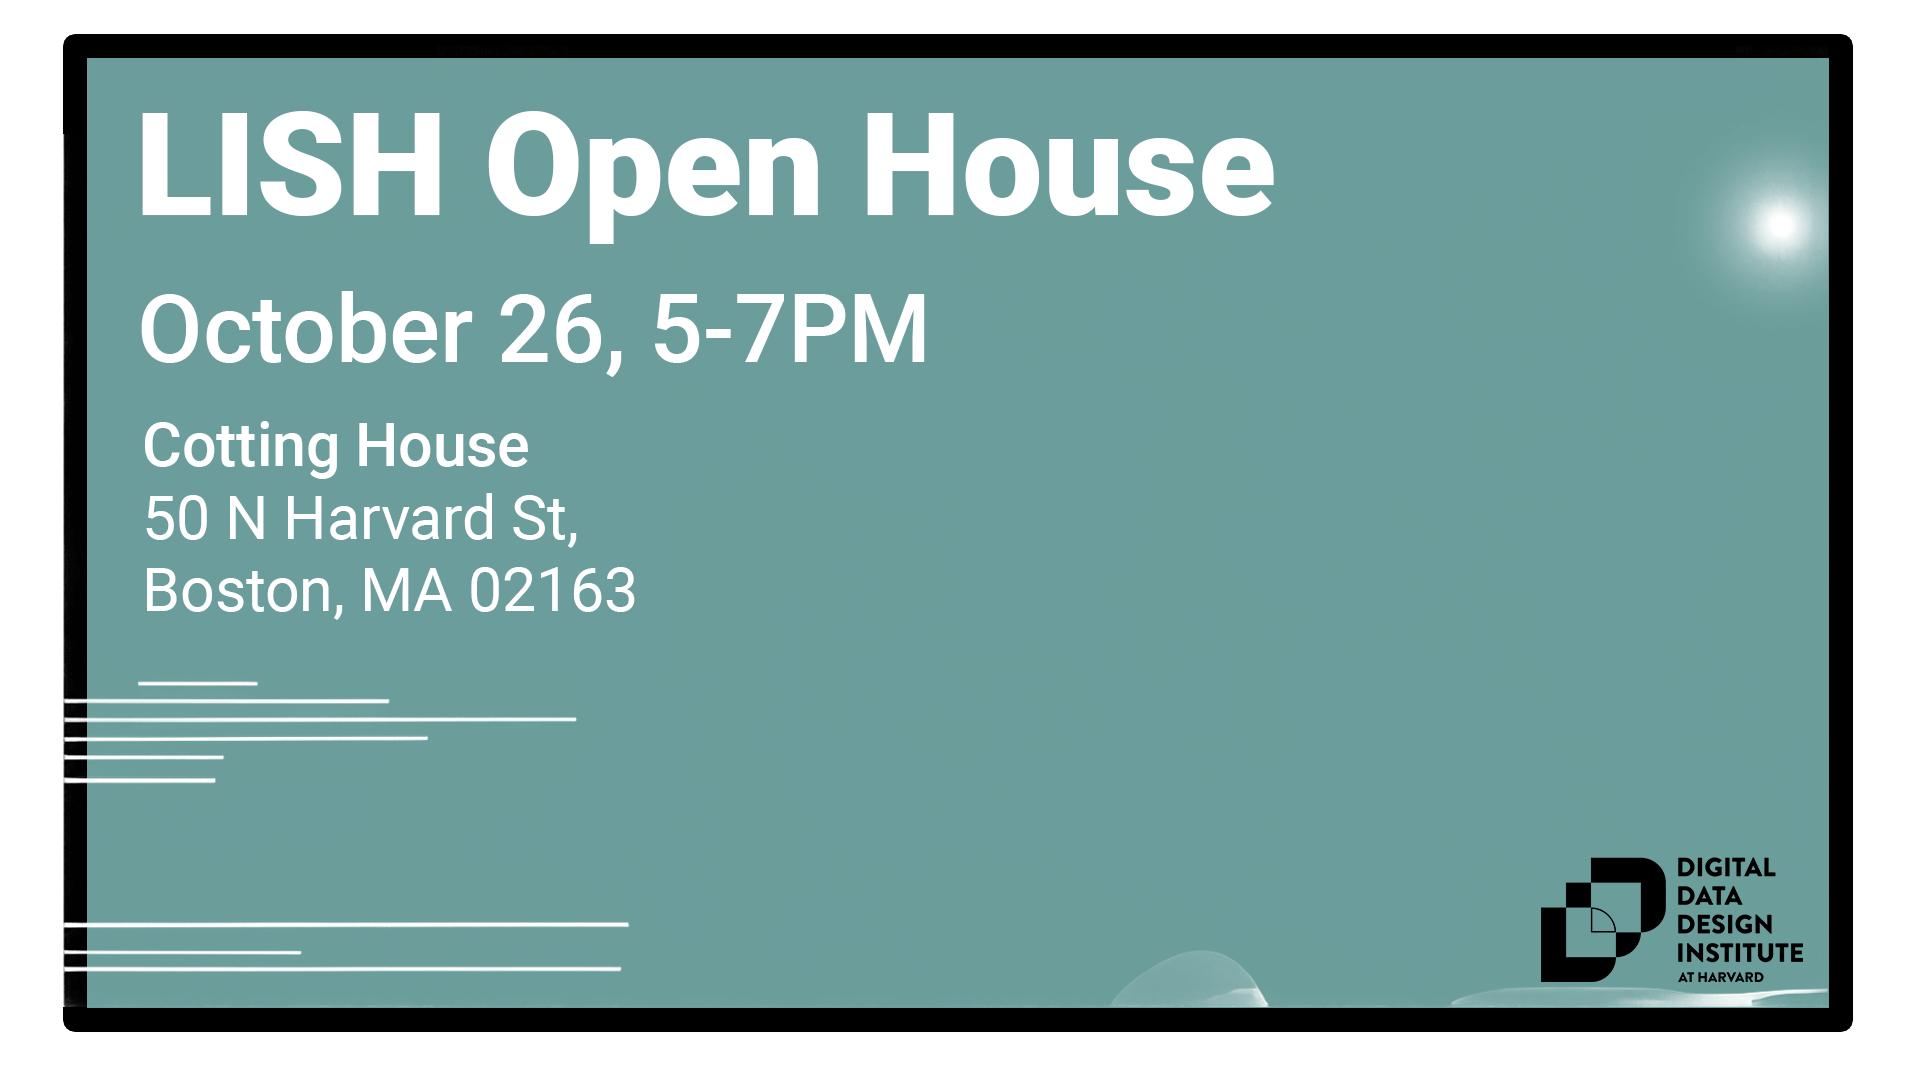 LISH Open House Graphic, October 26 5-7PM at Cotting House